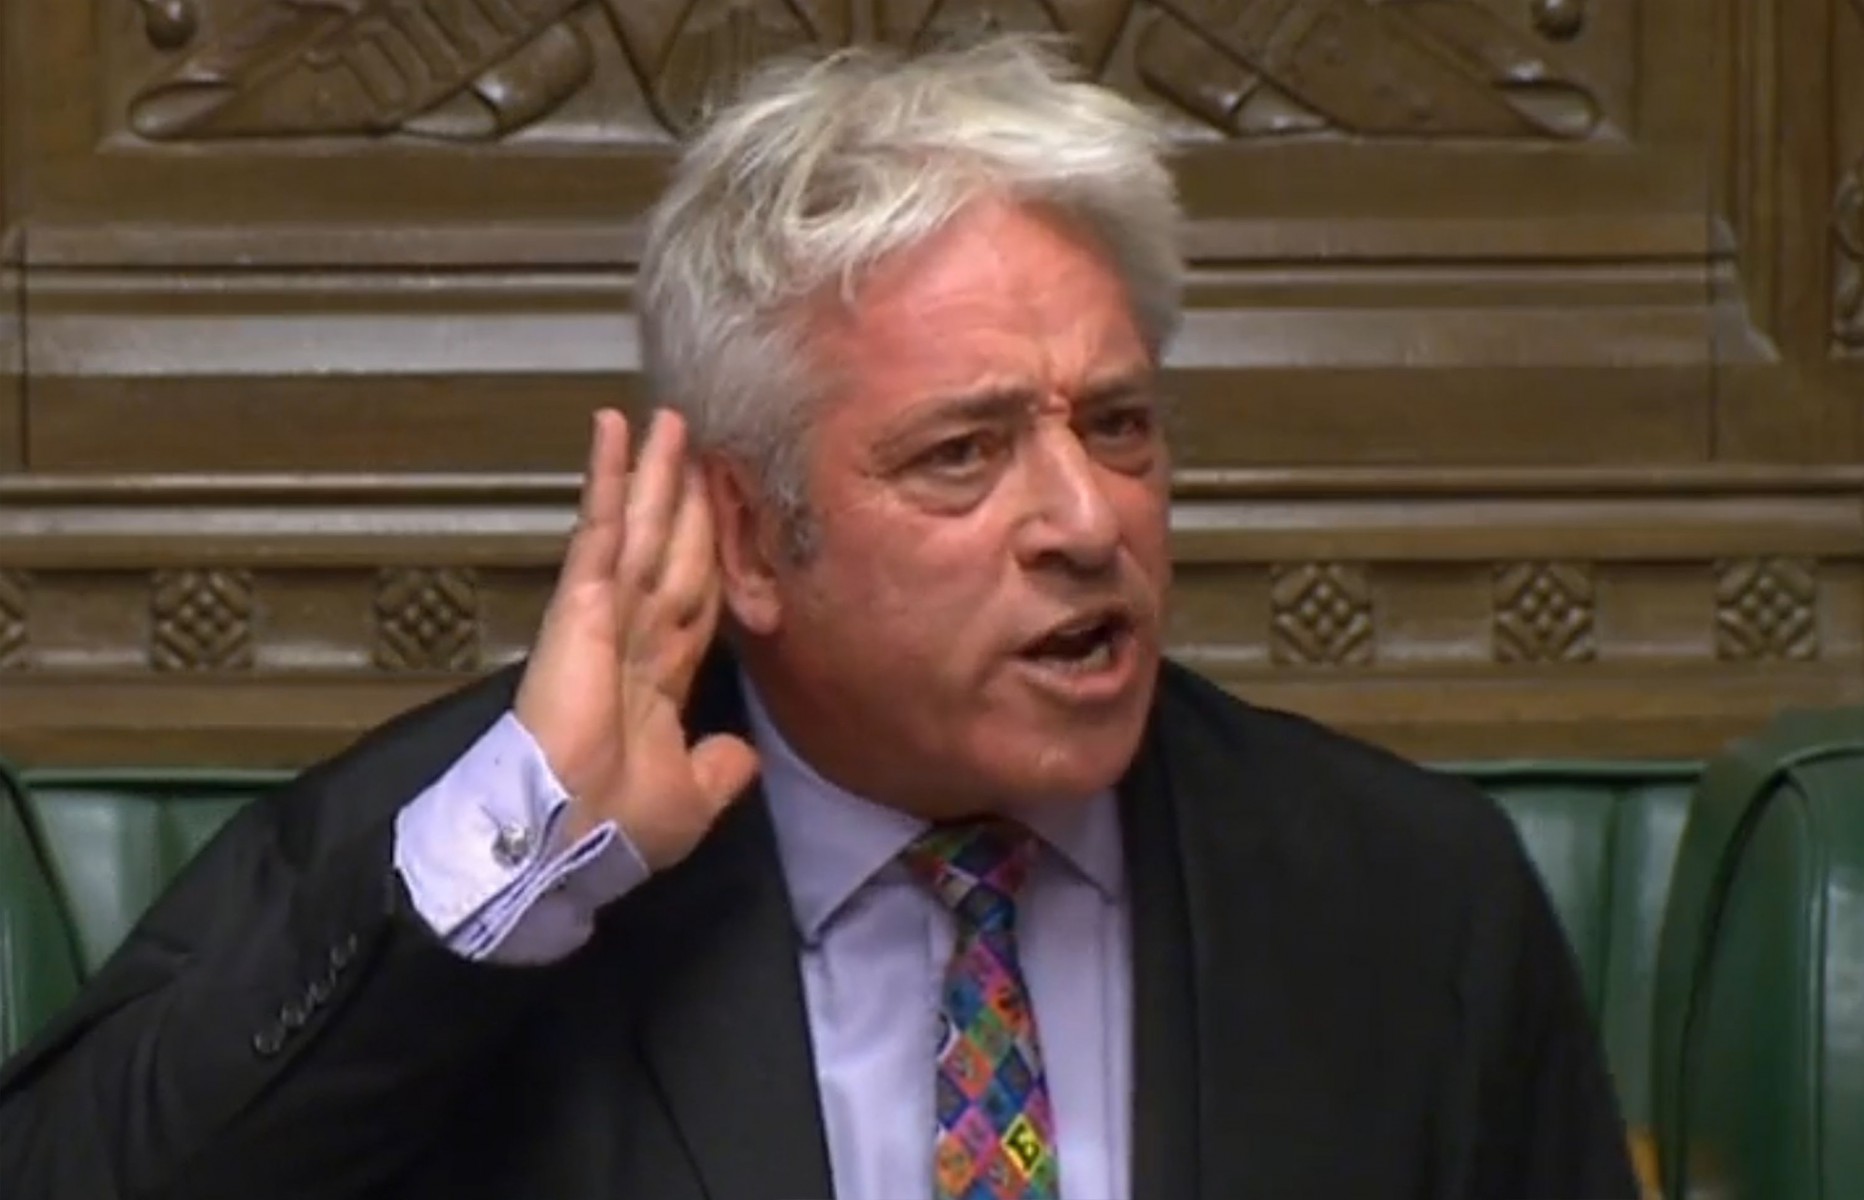 Remainer John Bercow is due to stand down and return to the backbenchers on Thursday, giving him a vote on Commons Brexit motions